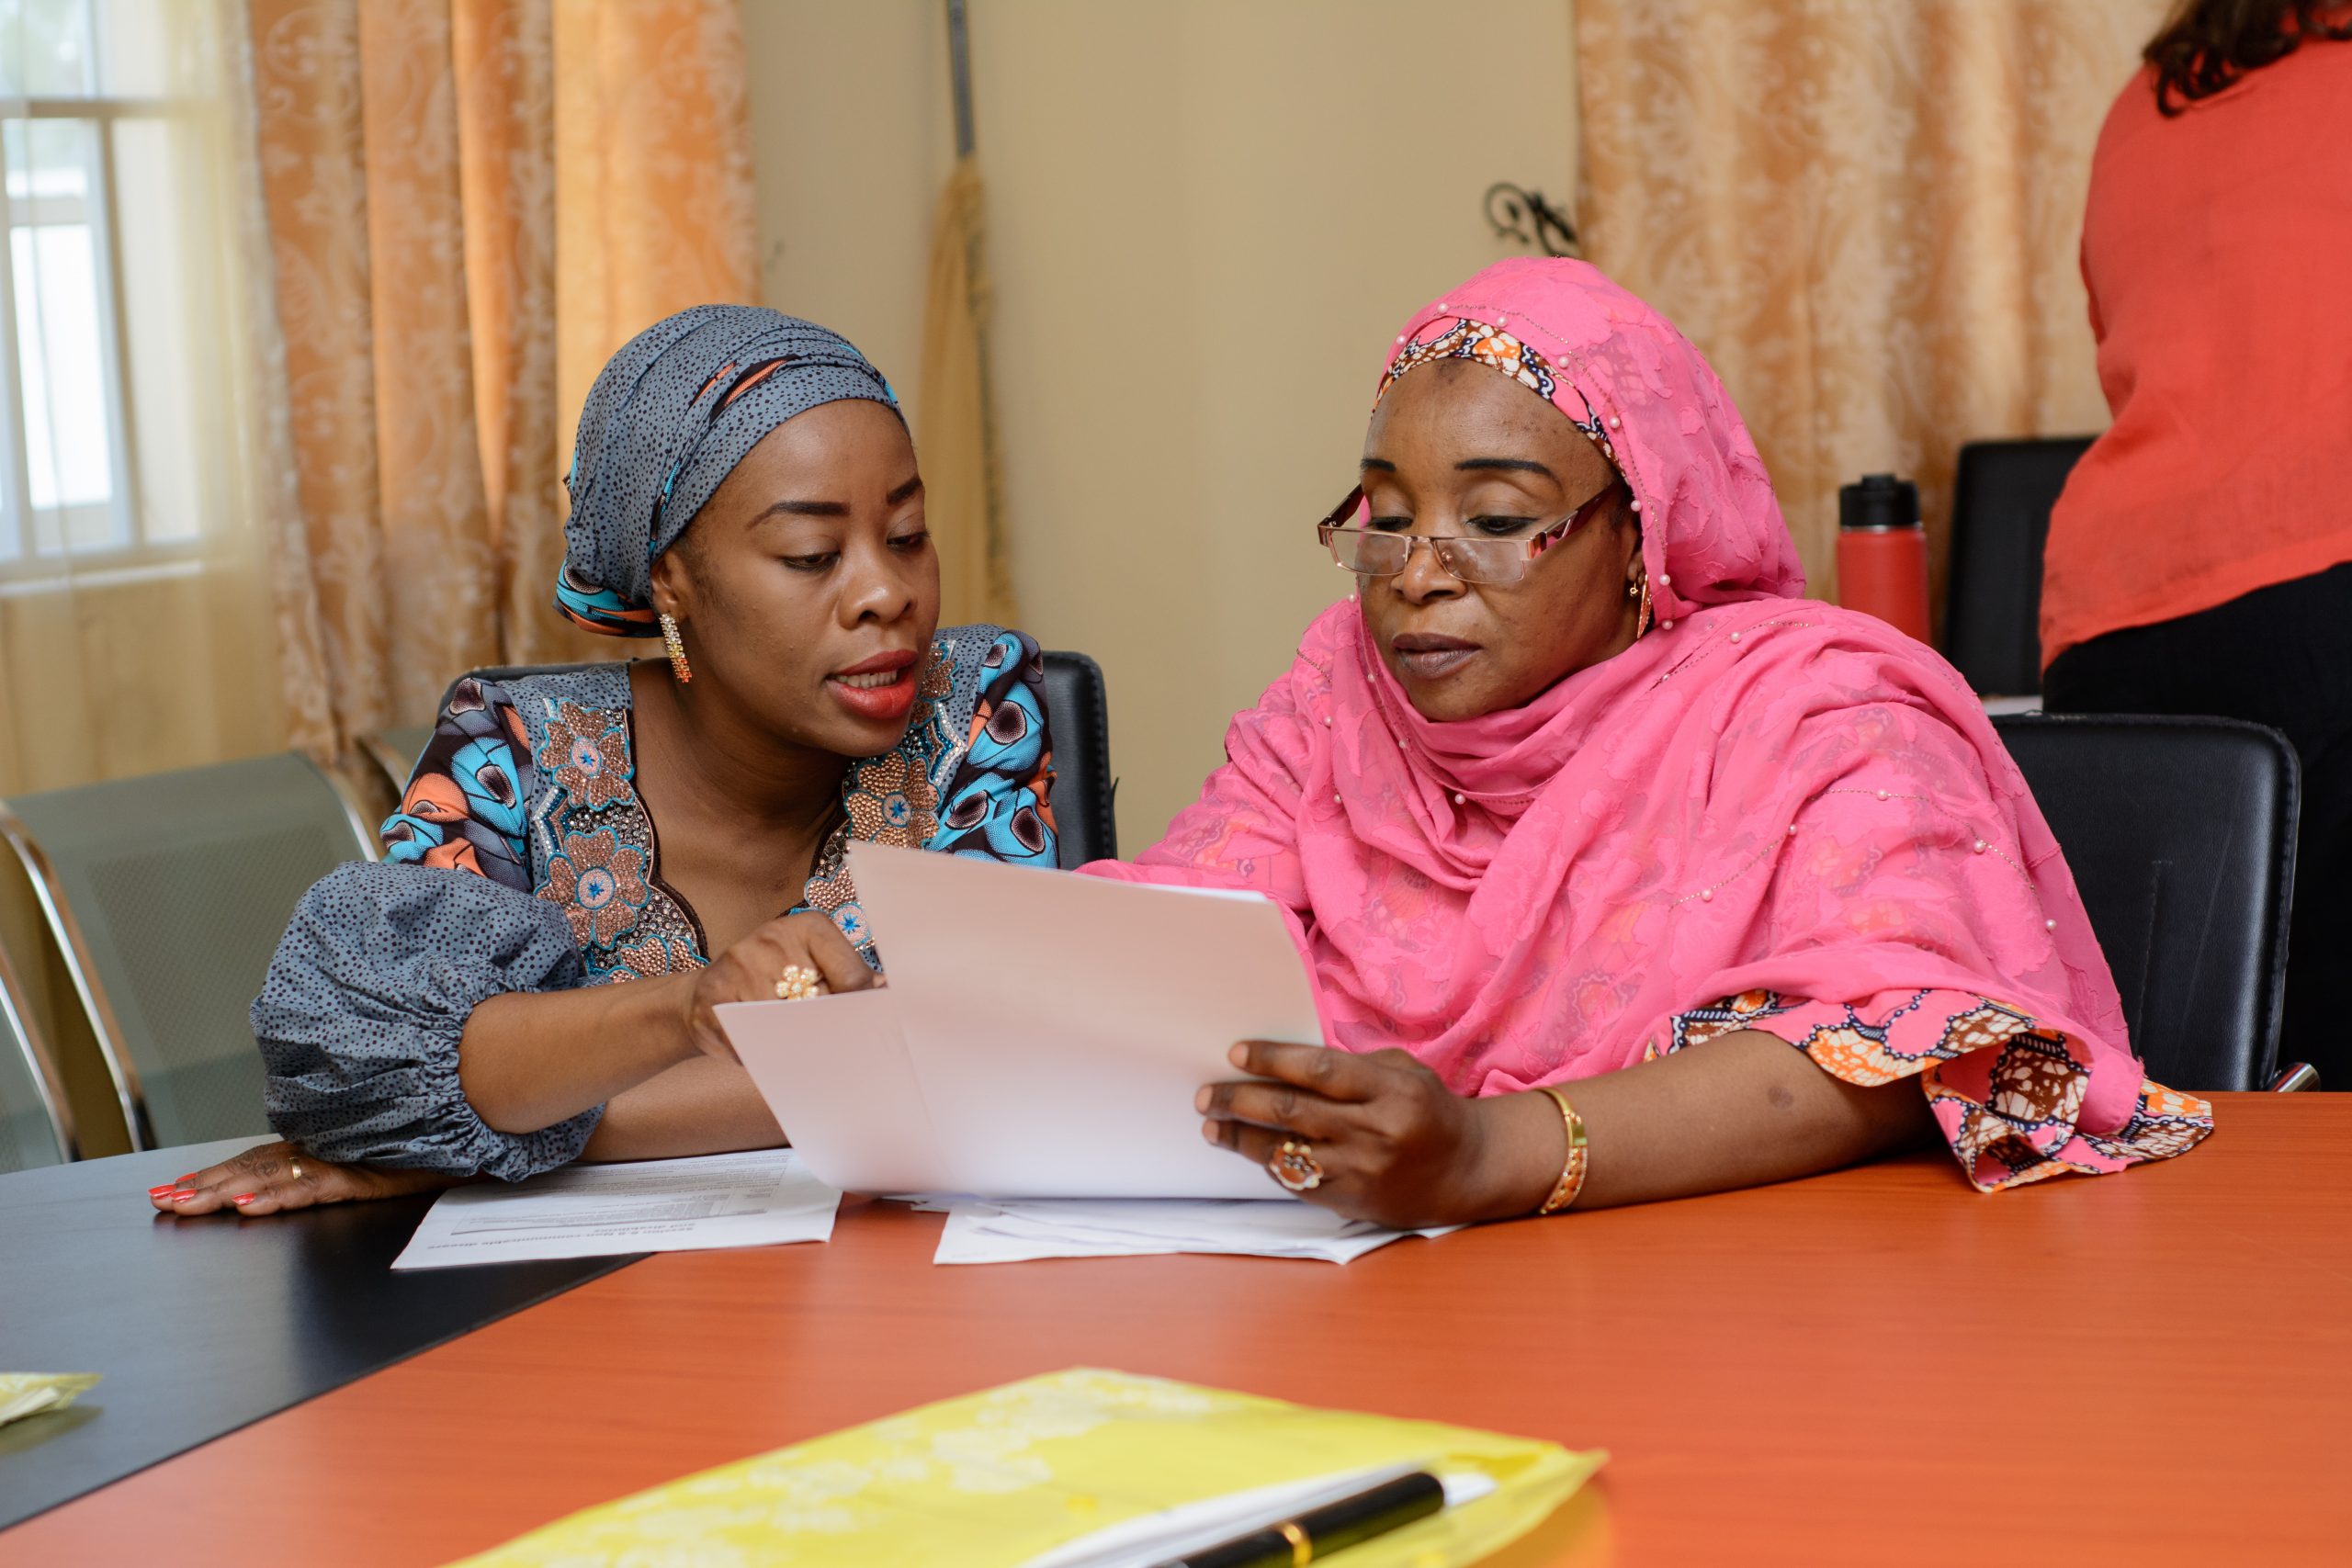 In Borno State, Nigeria, more than 100 village health workers were deployed in their communities as part of the first phase of WRC’s work with government and local organizations providing community-based health services.